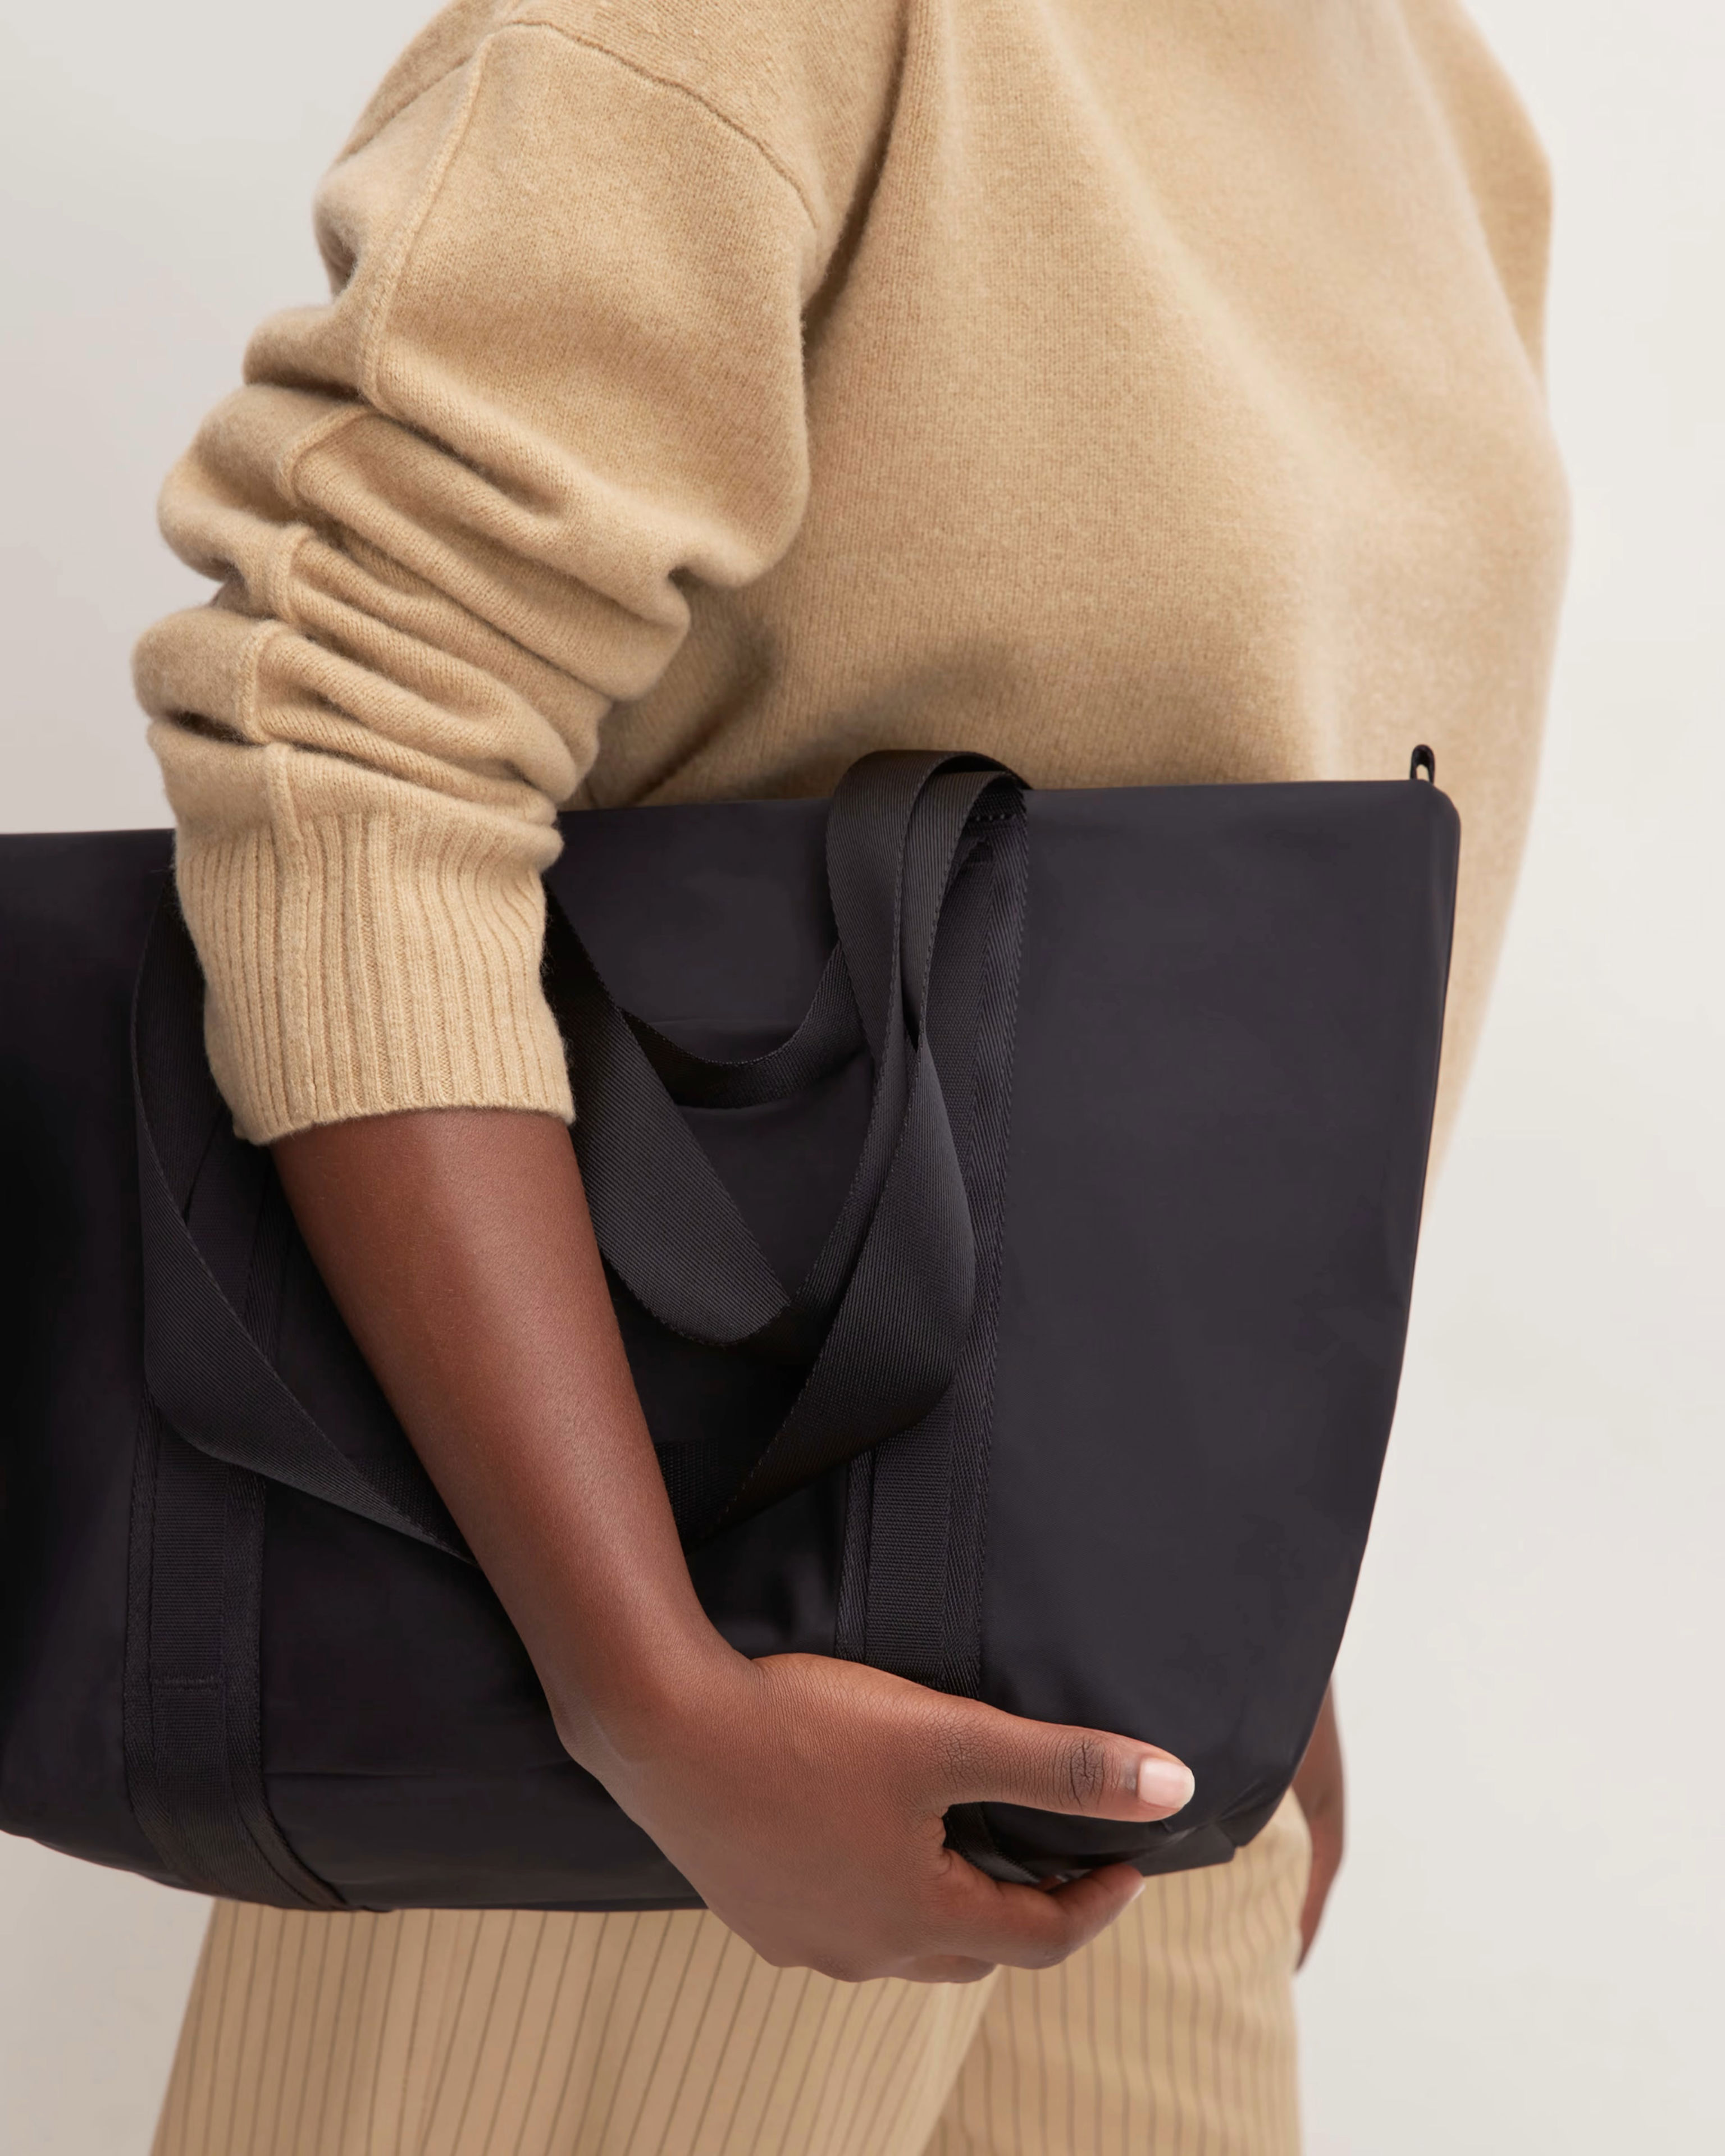 <h3><a href="https://fave.co/43vZhMh" rel="noopener noreferrer">Everlane The Recycled Nylon Tote</a> </h3><p>If you decide to get some done in your apartment complex's resident lounge, all you need is this medium-sized tote by Everlane. It's designed to fit a 13" laptop along with a couple of notebooks if you need them. The extra padding inside helps keep your technology safe from bumps and bruises while the pockets help you store your writing utensils. </p><p>If that didn't catch your attention, the fact that this tote bag is certified by the Global Recycled Standard will! It's made of recycled nylon and polyester so you'll have something sustainable on your arm.</p><a href="https://fave.co/43vZhMh">Shop Now</a>